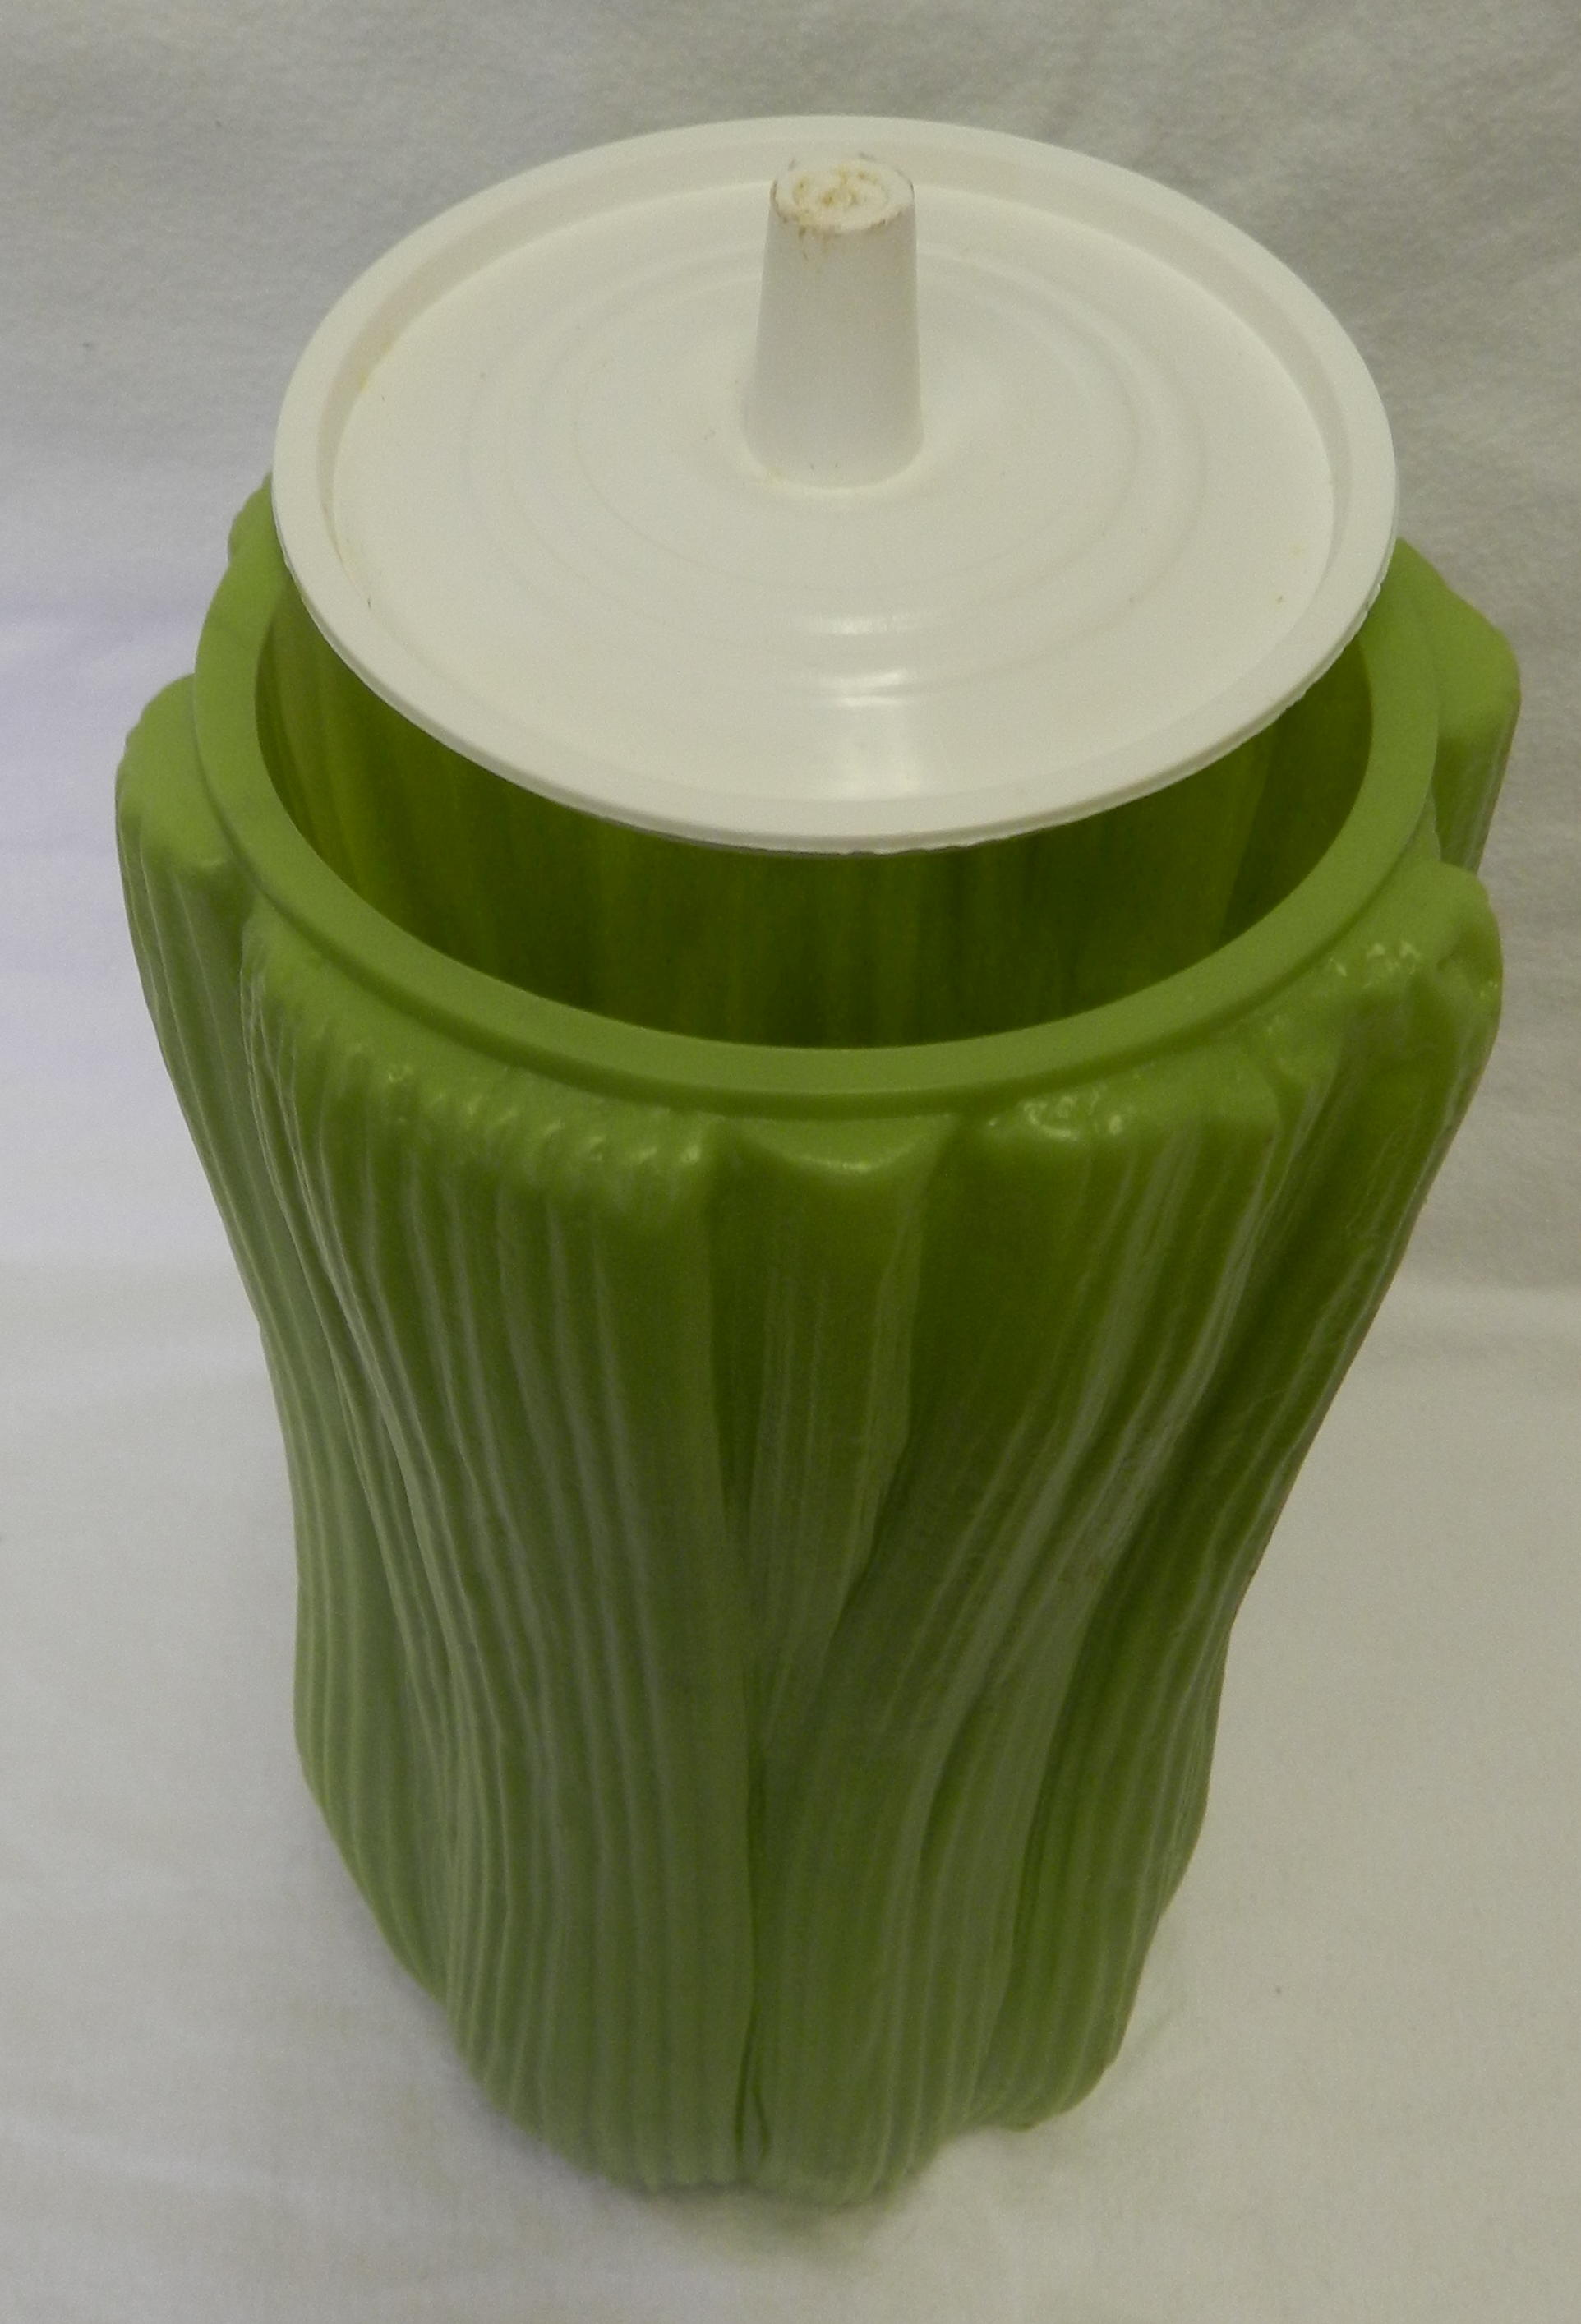 Vintage Retro Avocado Green Celery Plastic Keeper Container Canister 